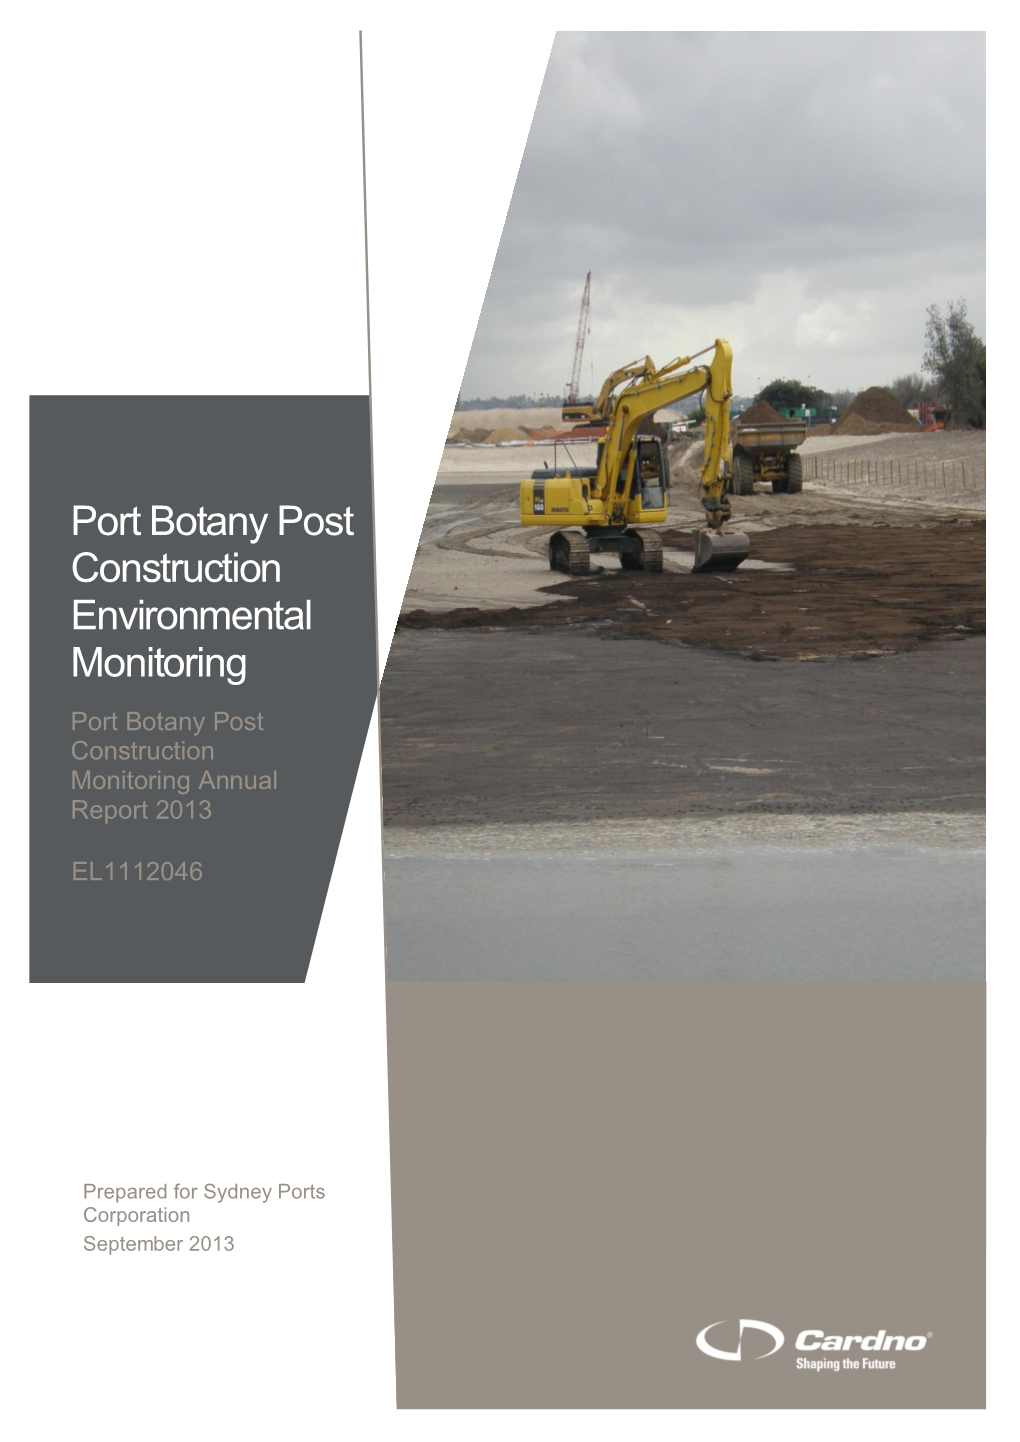 Port Botany Post Construction Monitoring Annual Report 2013